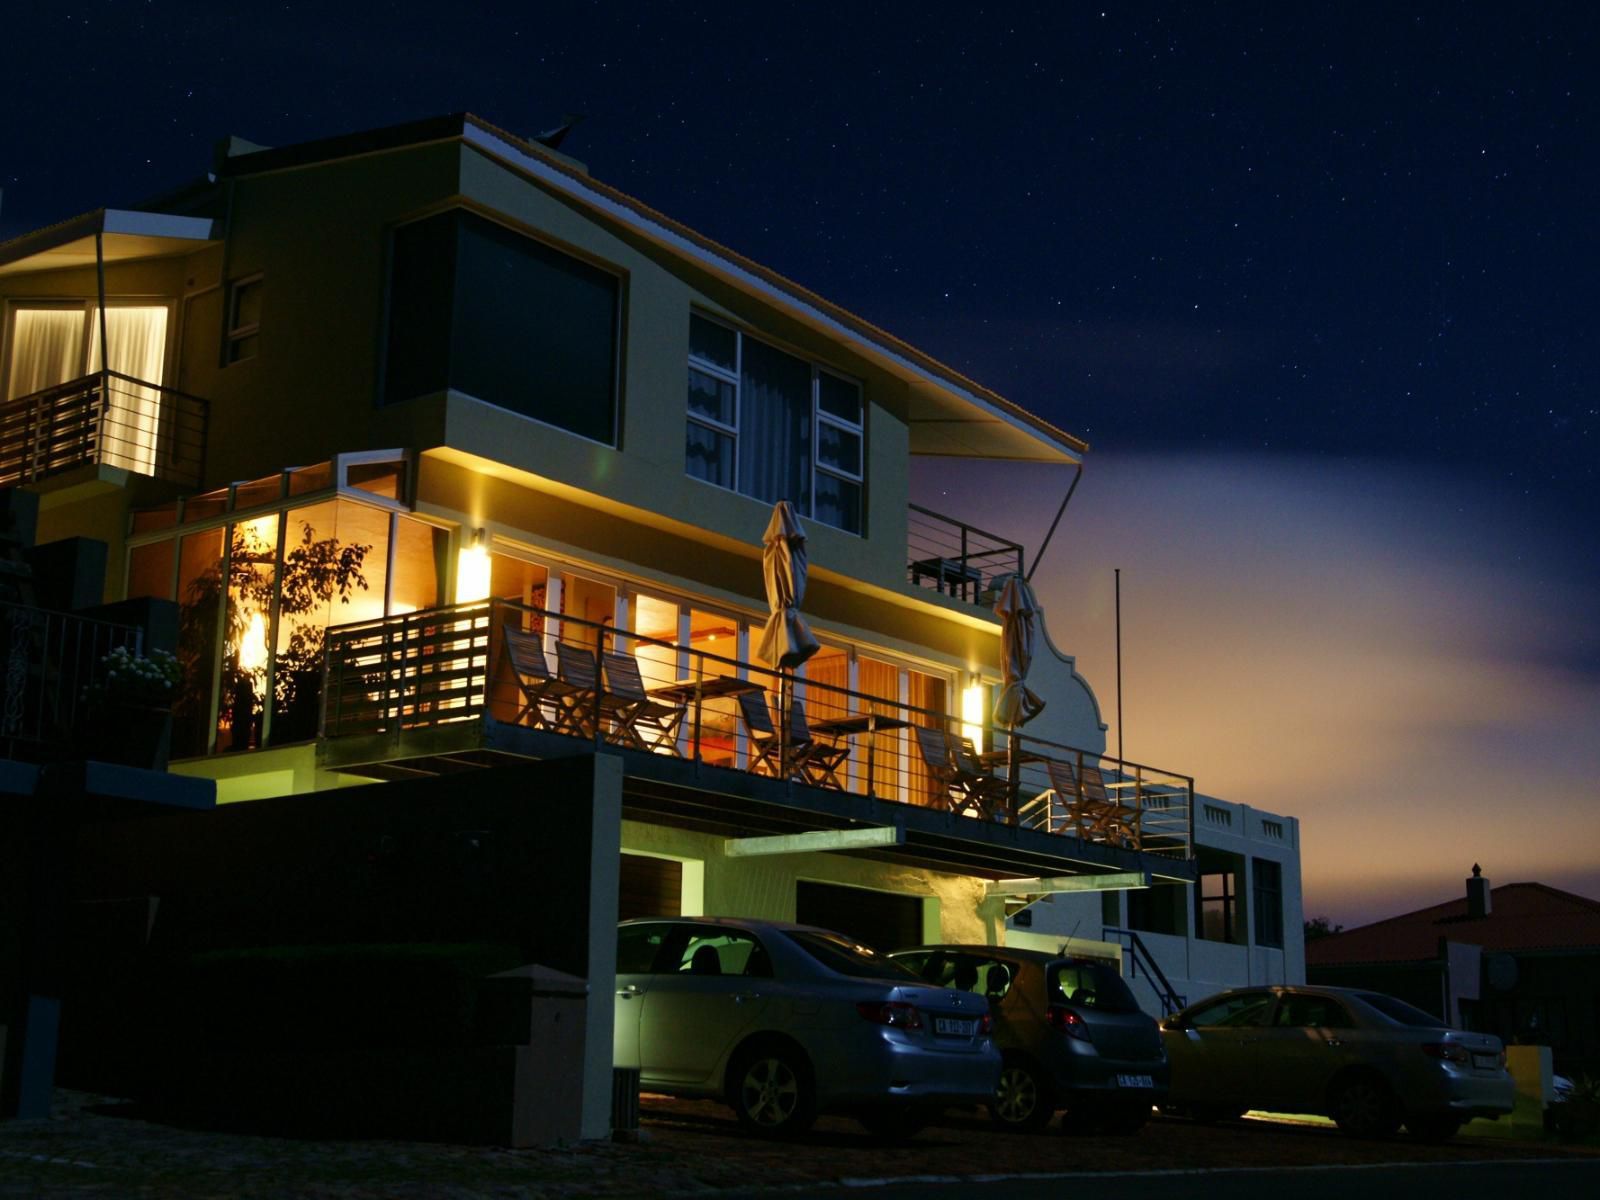 Whalesong Lodge De Kelders Western Cape South Africa House, Building, Architecture, Car, Vehicle